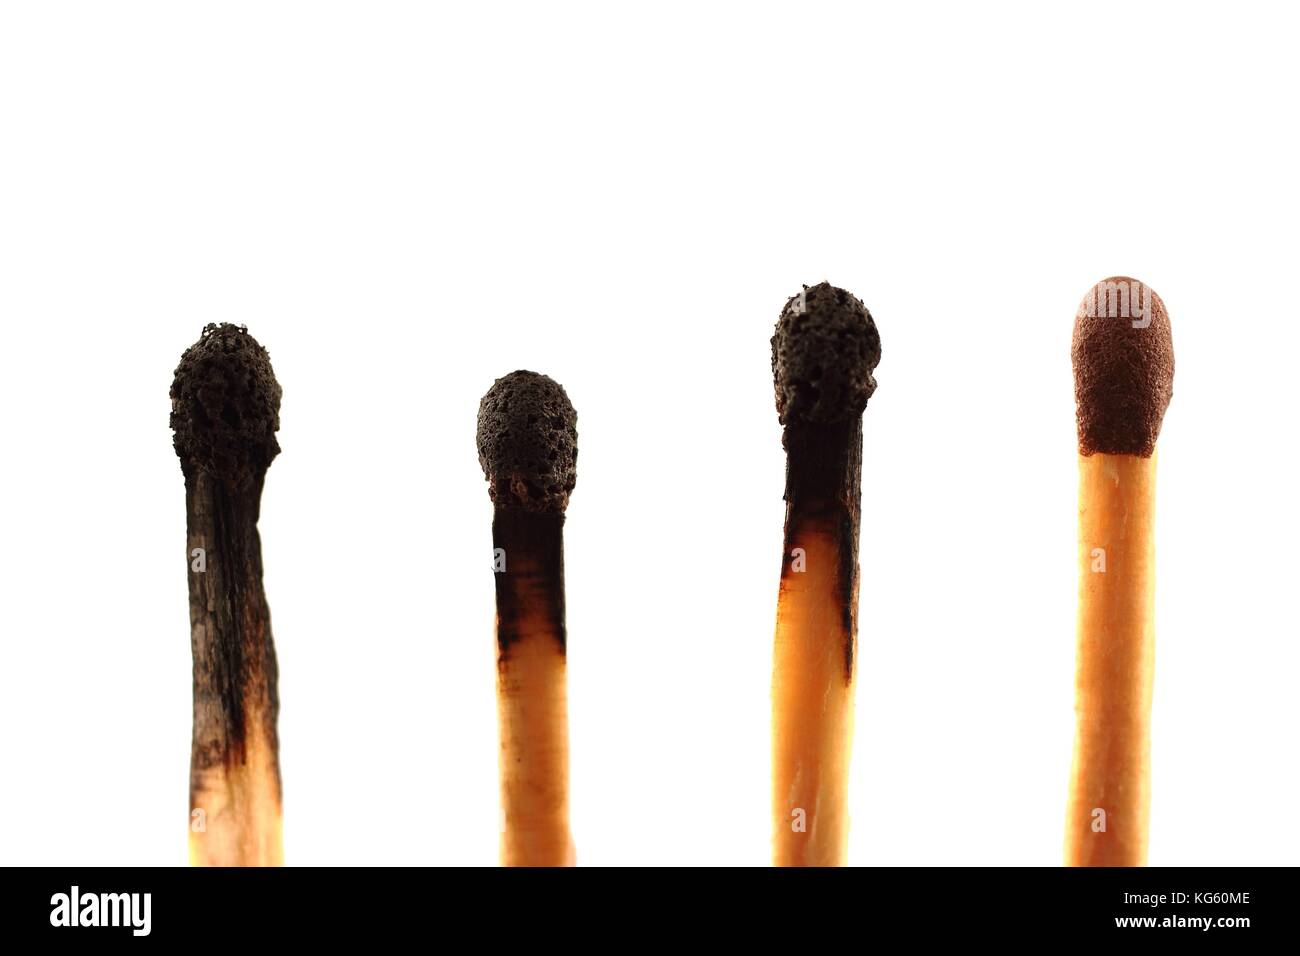 Four matches - three used and one unused - against a white background in landscape format with copy space Stock Photo